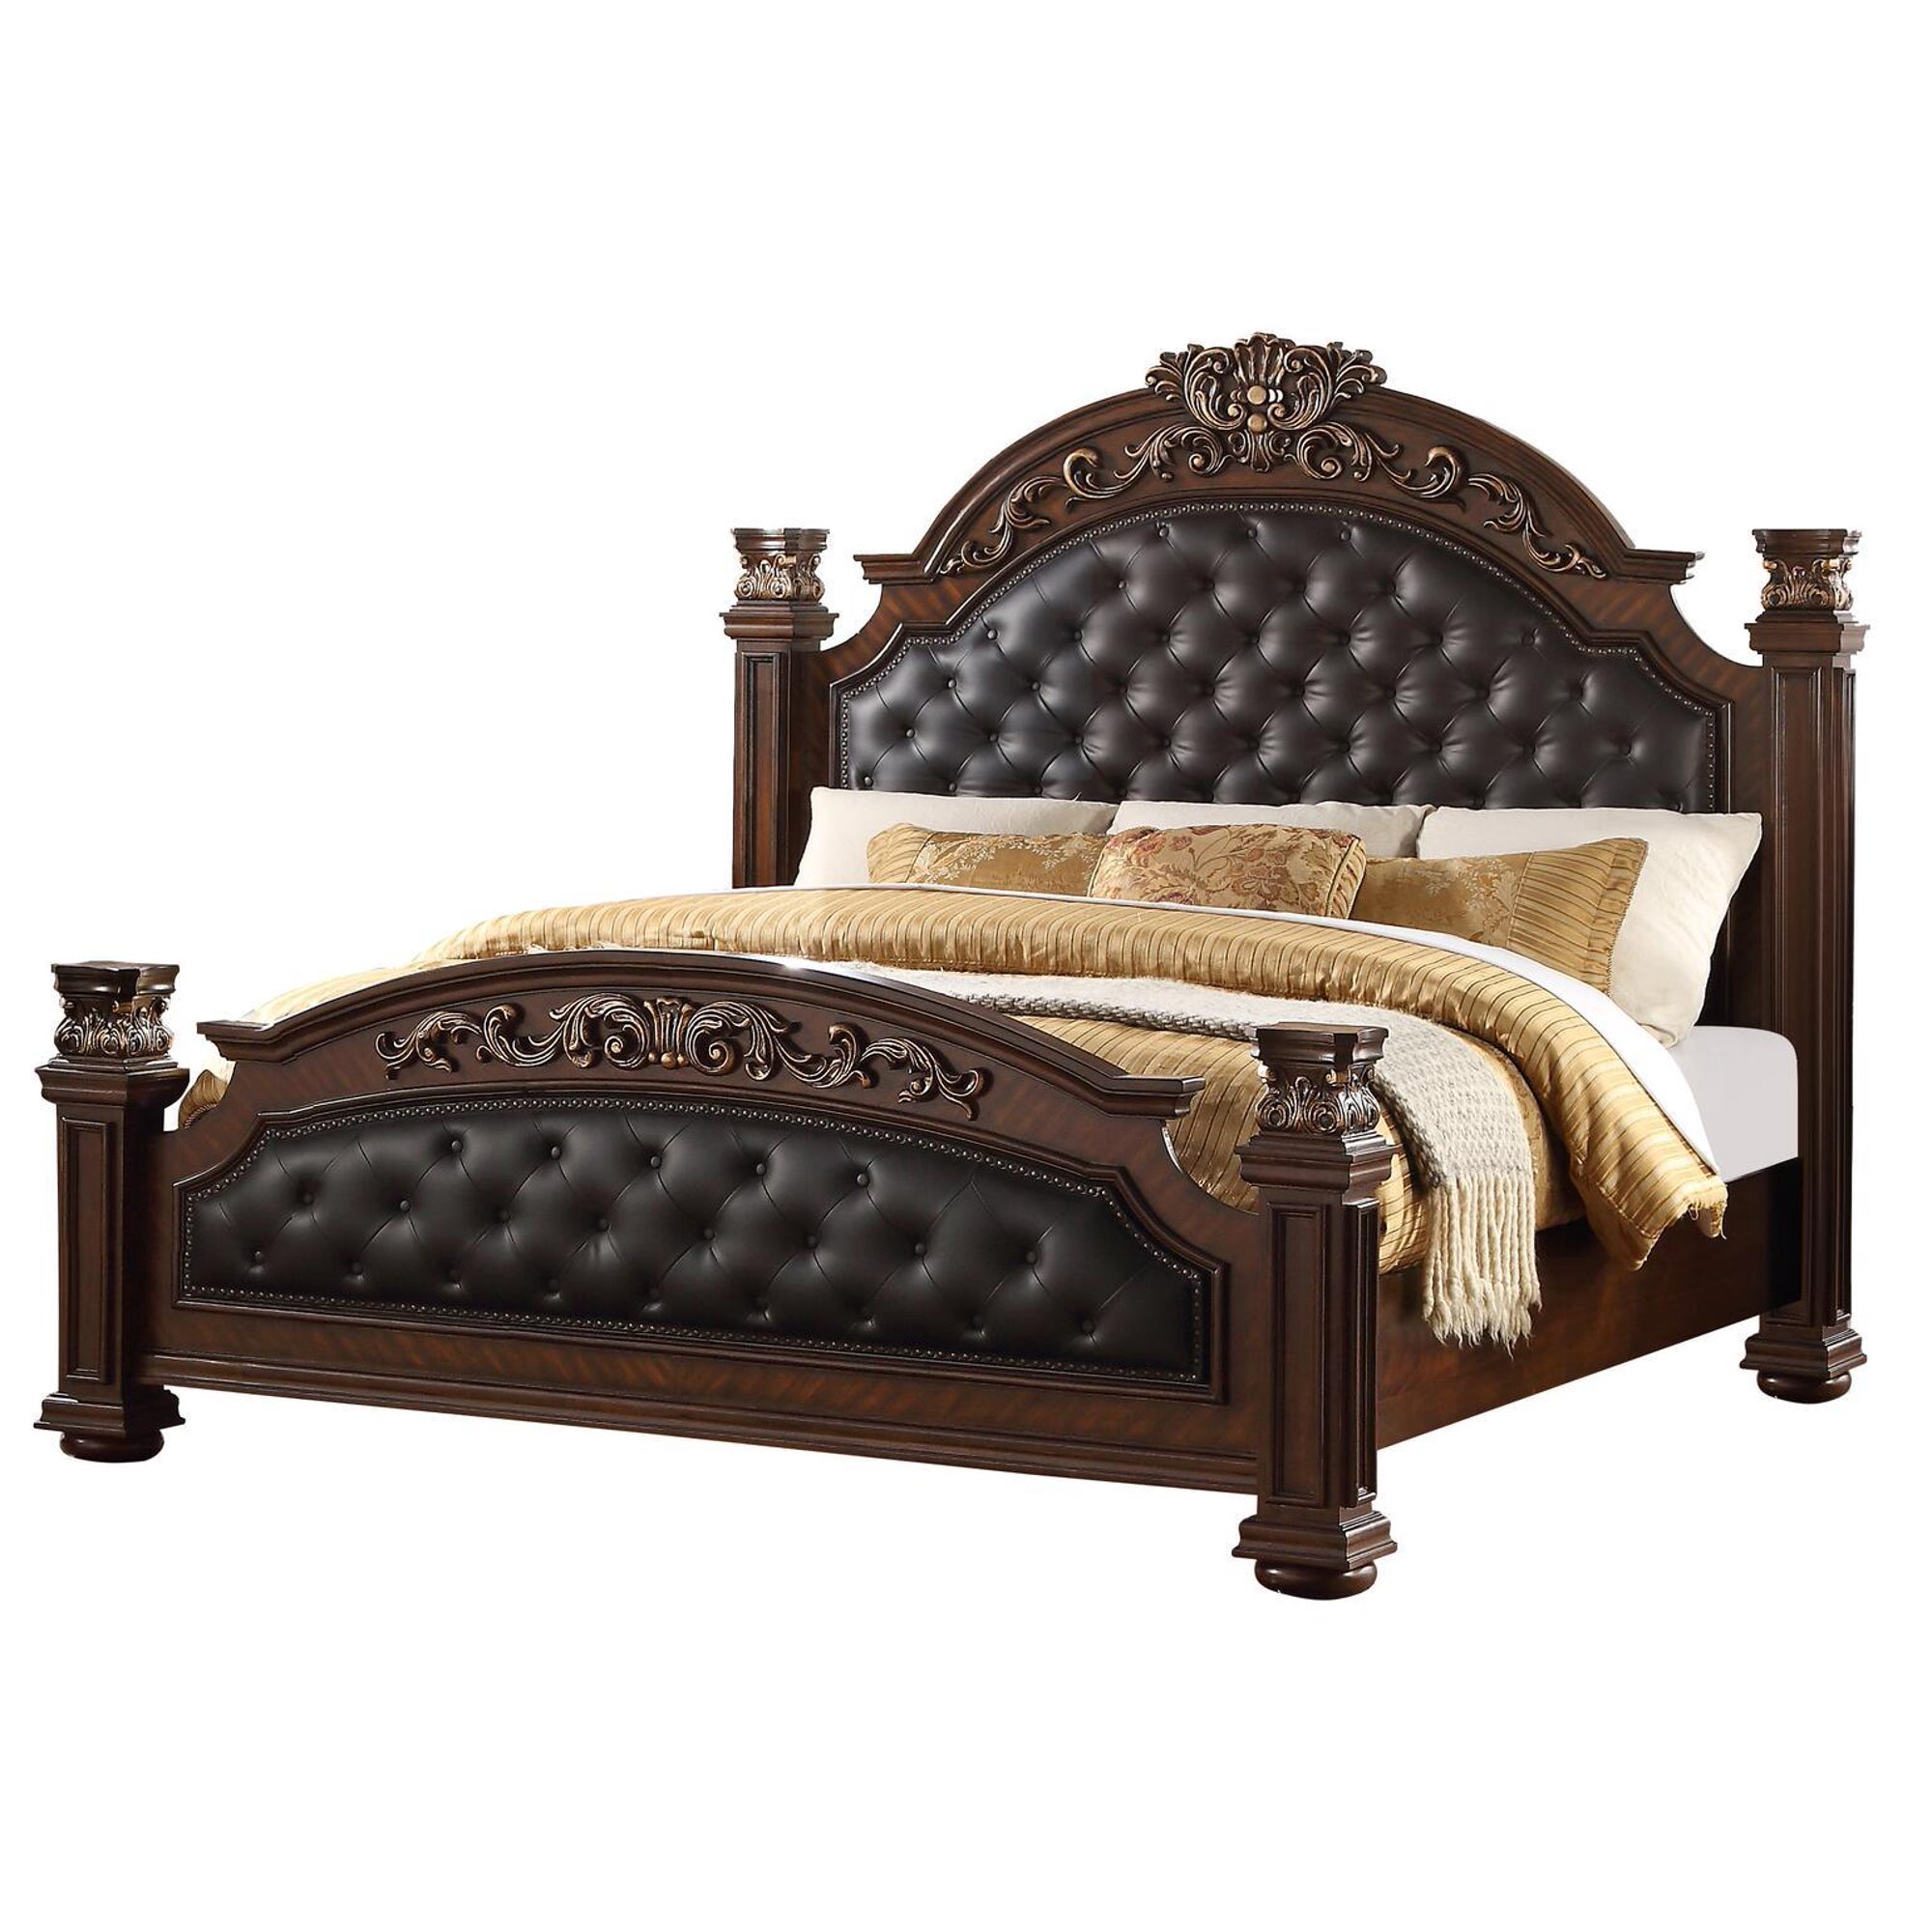 Aspen Traditional Style King Bed In Cherry Finish Luchy Amor Furniture